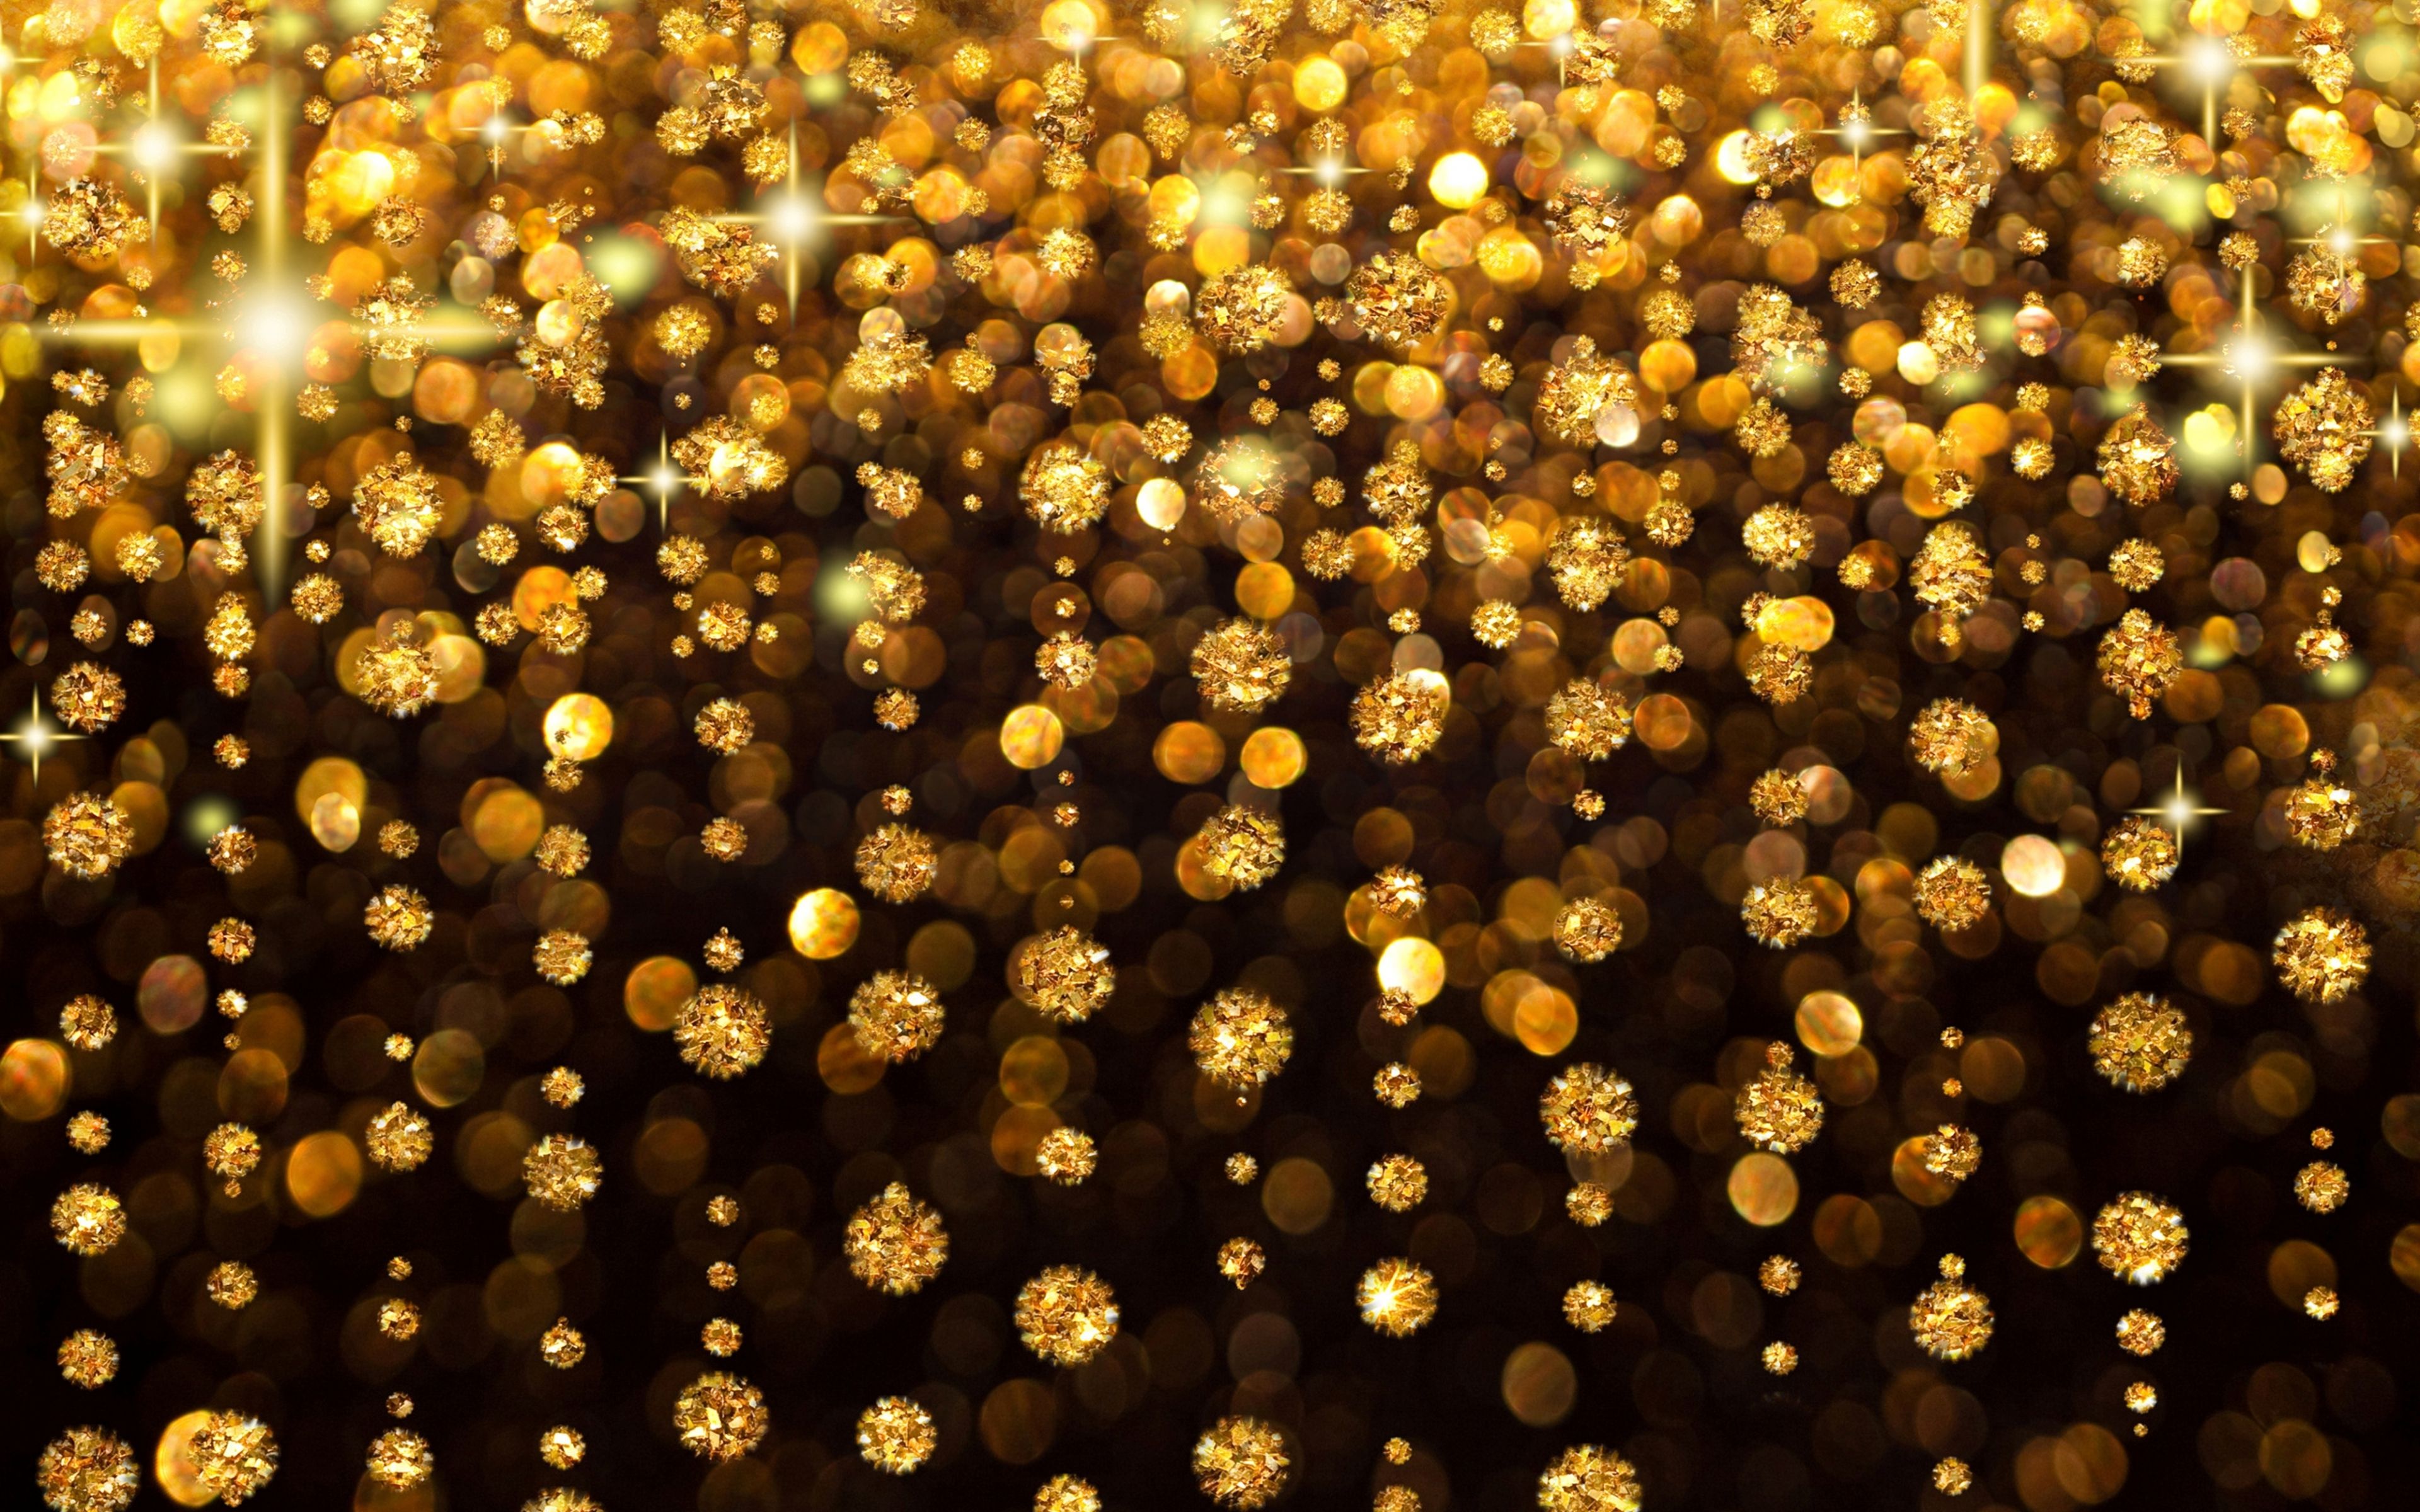 Gold Background Images - Wallpaper Cave